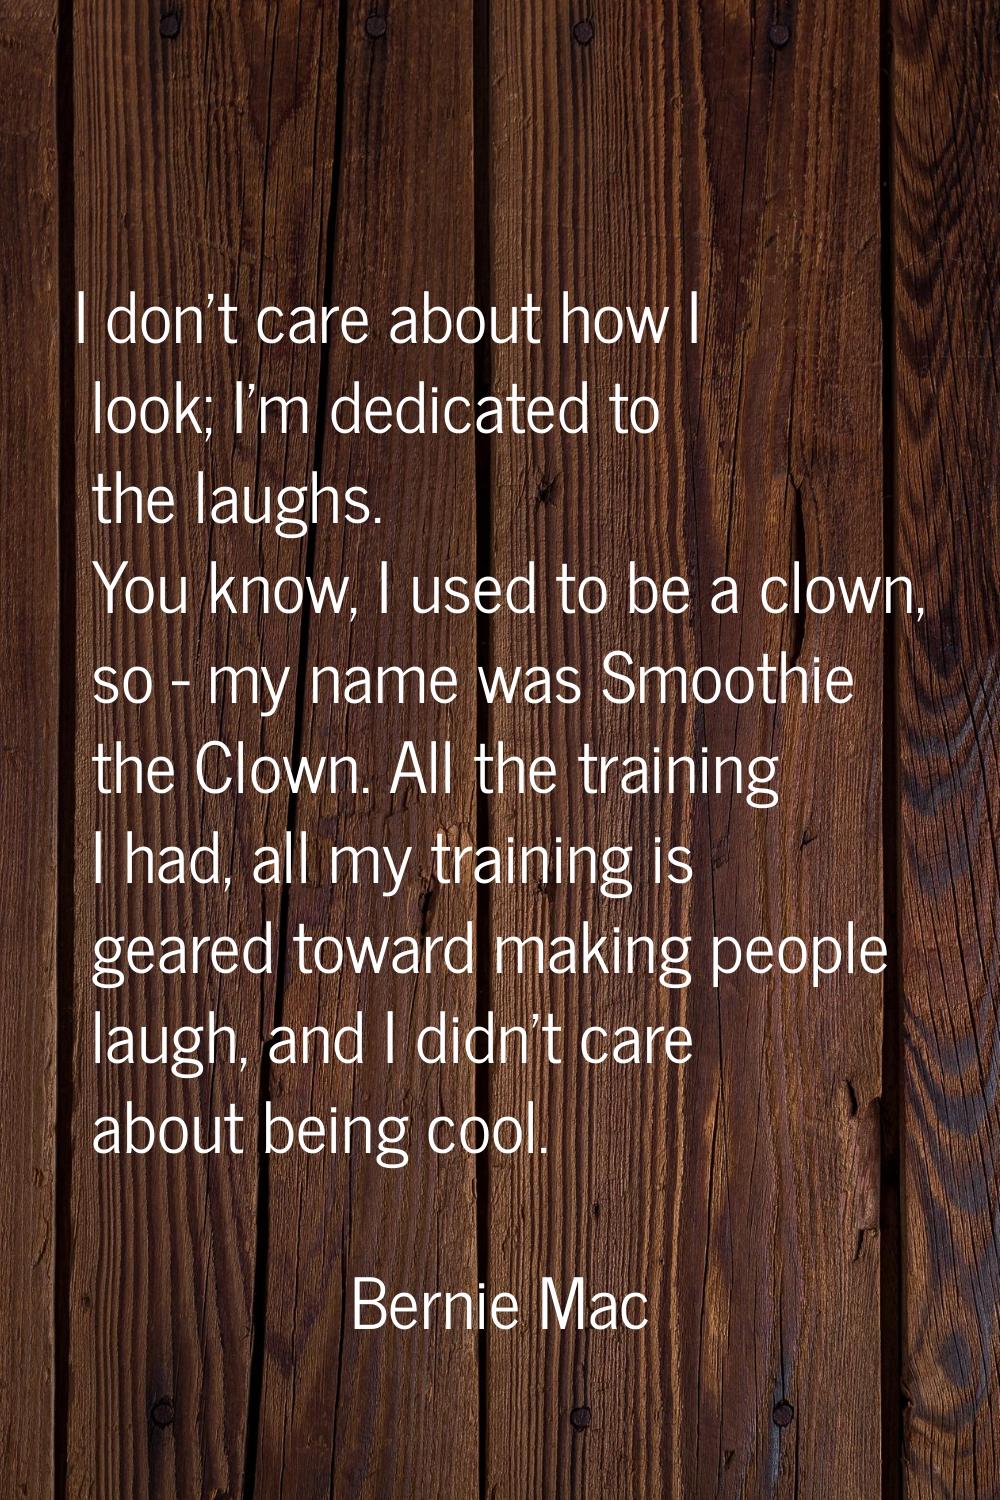 I don't care about how I look; I'm dedicated to the laughs. You know, I used to be a clown, so - my